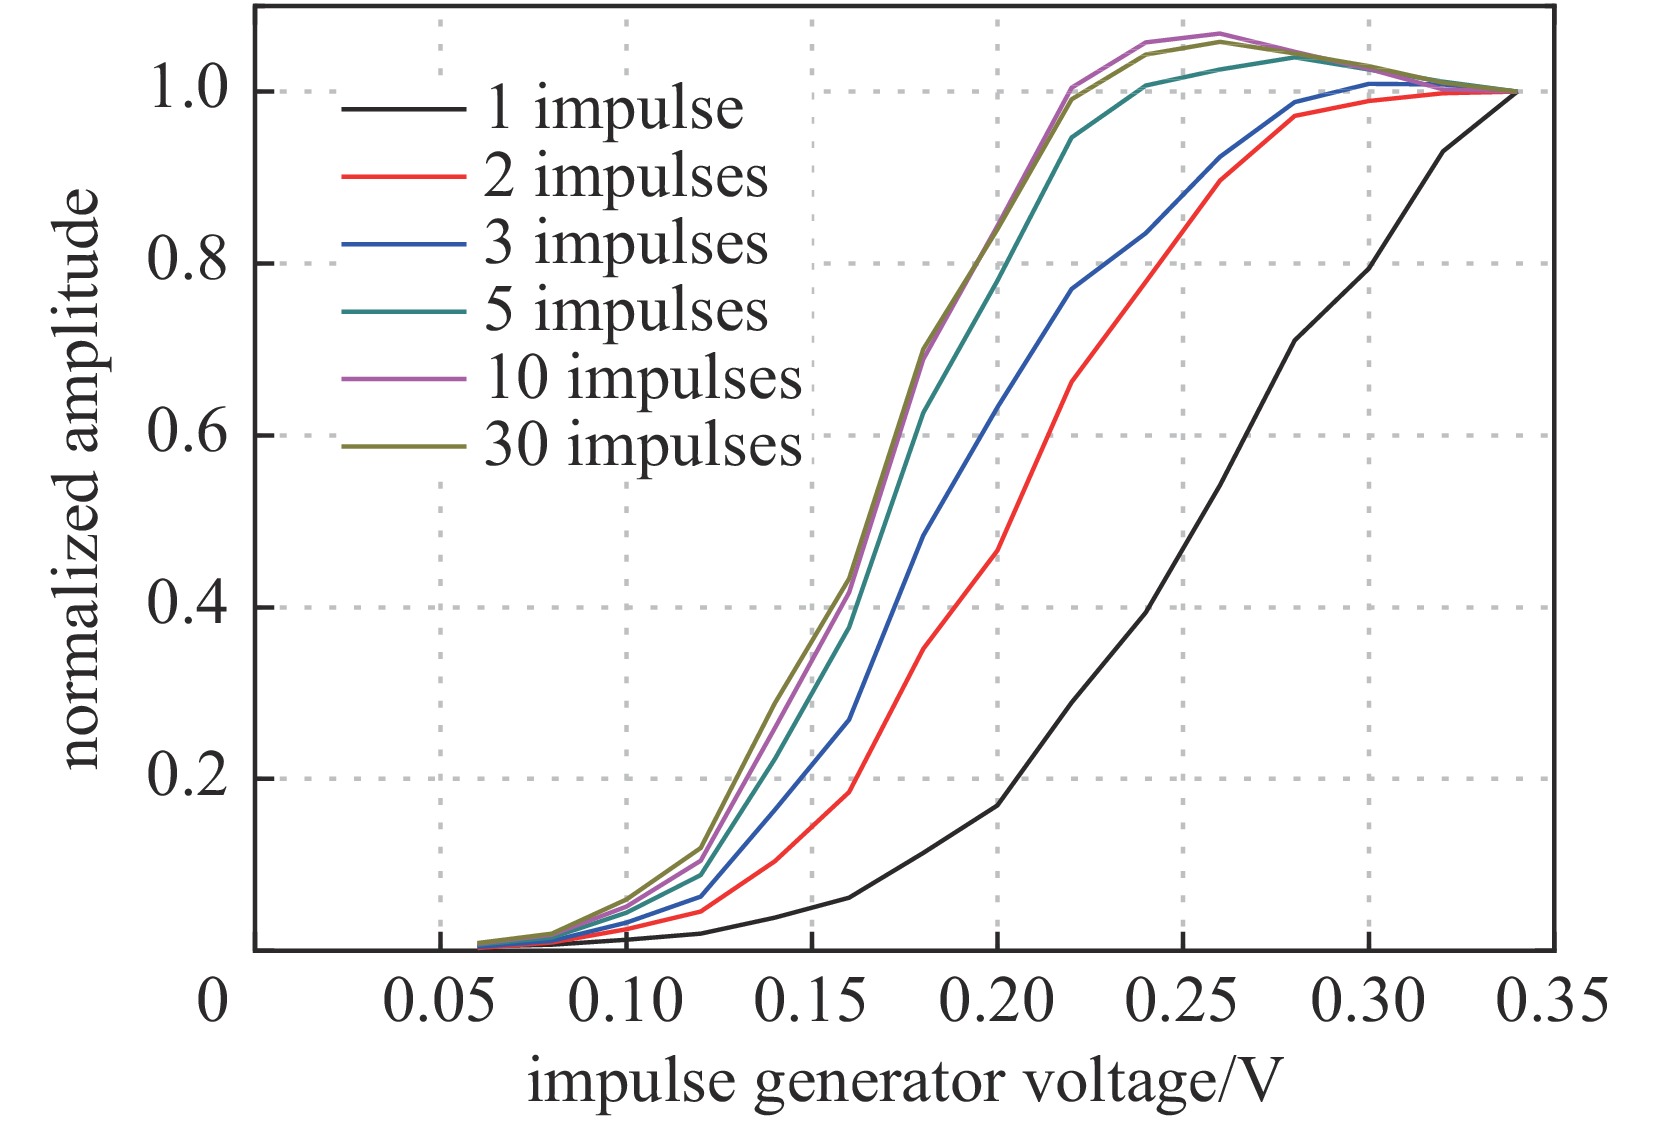 Response curves with different amount of electrical impulses in a single beam